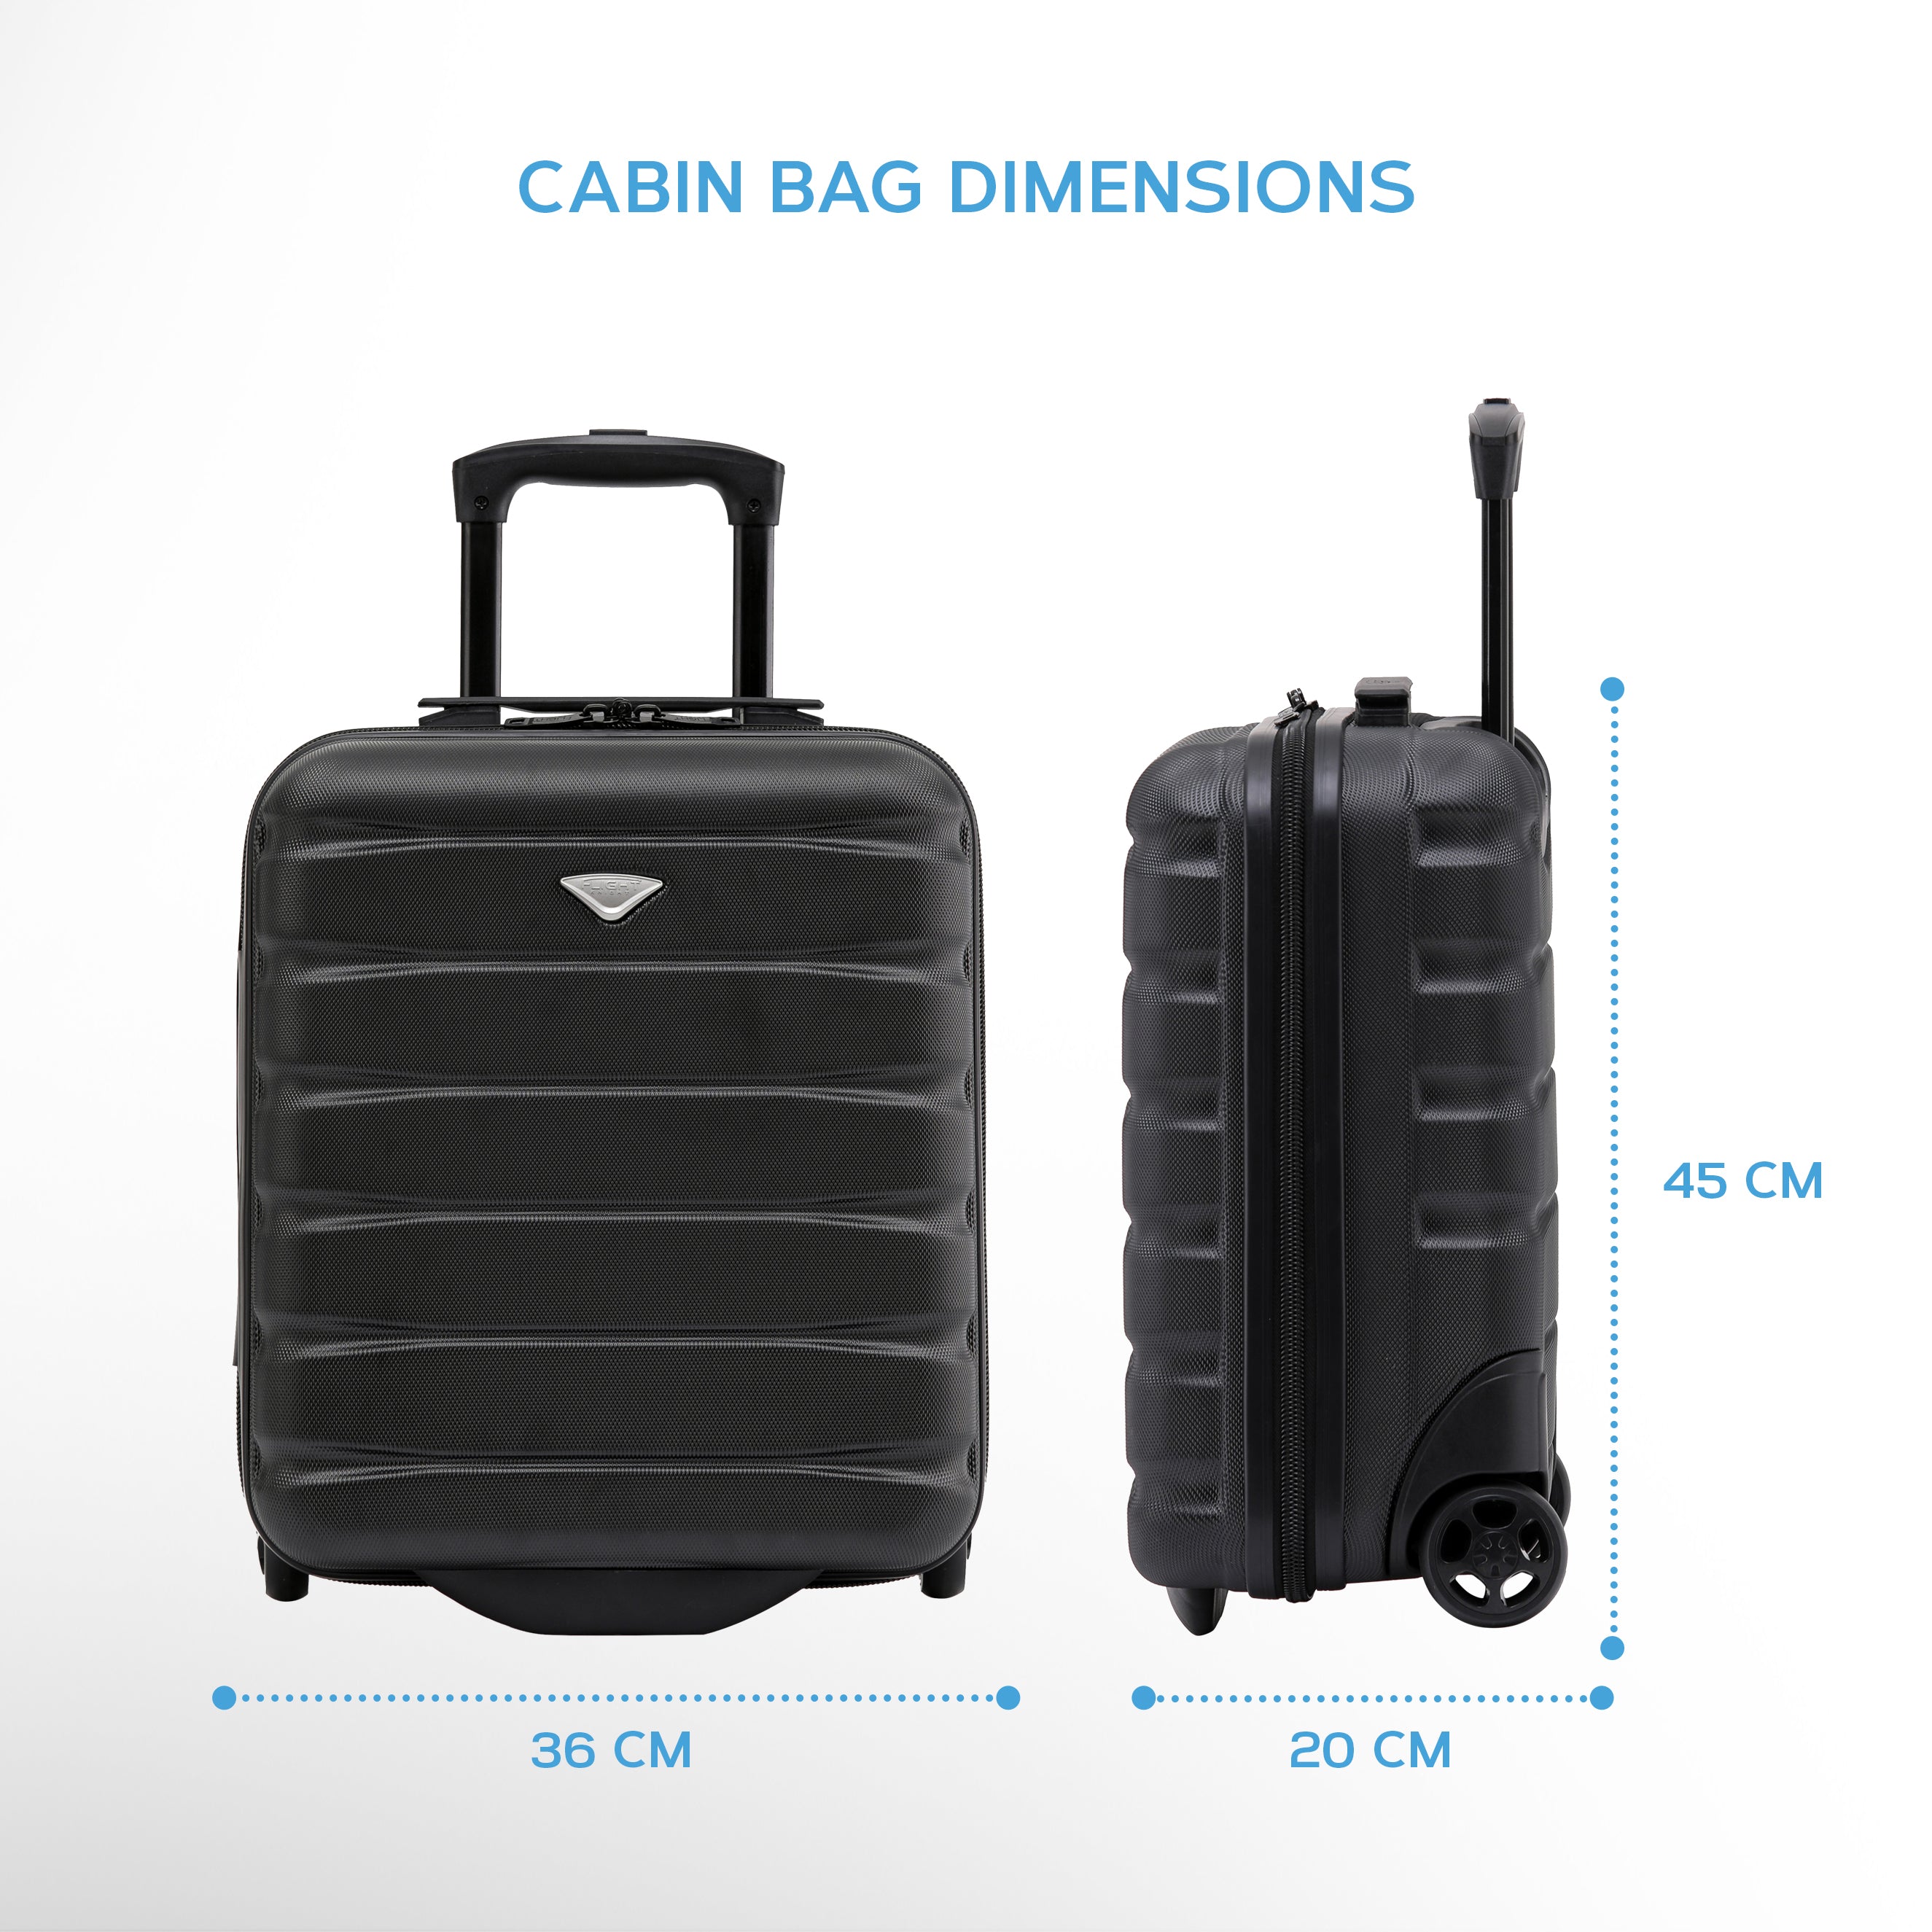 LEARNING LANGUAGES ABROAD | Cabin bag sizes and carry-on luggage guide